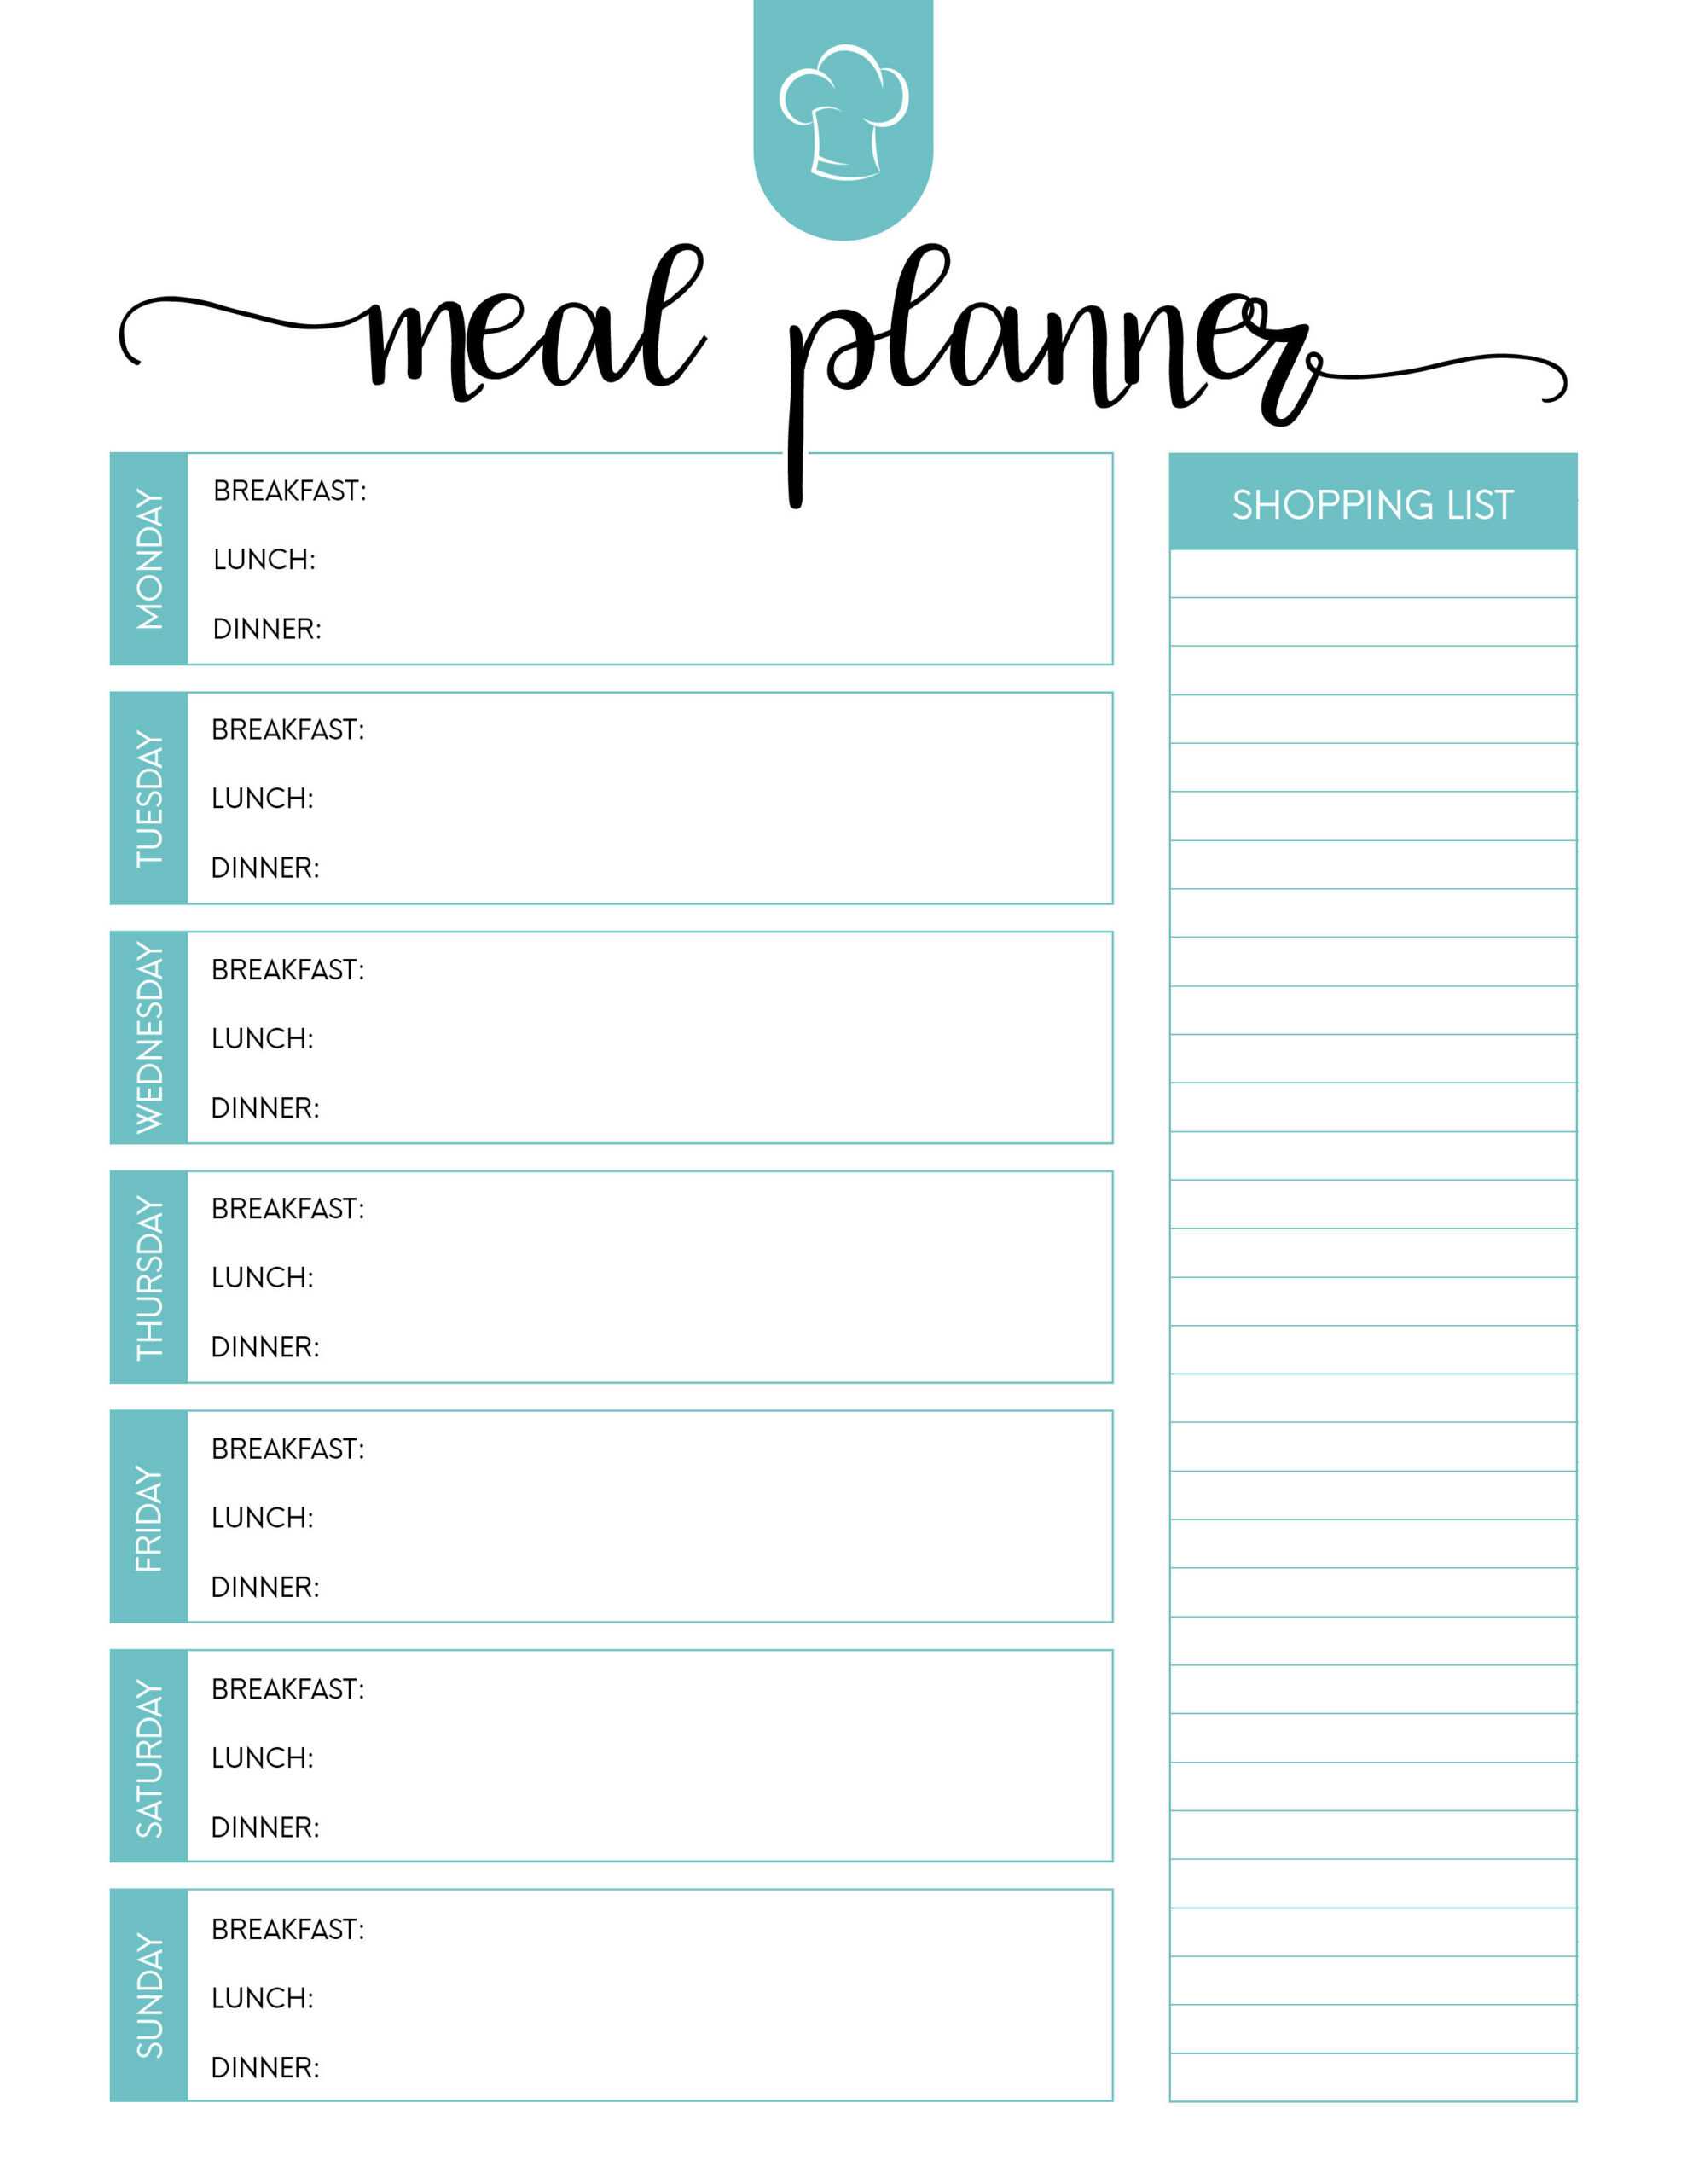 Fan Free Printable Meal Planner | Rodriguez Blog With Regard To Blank Meal Plan Template